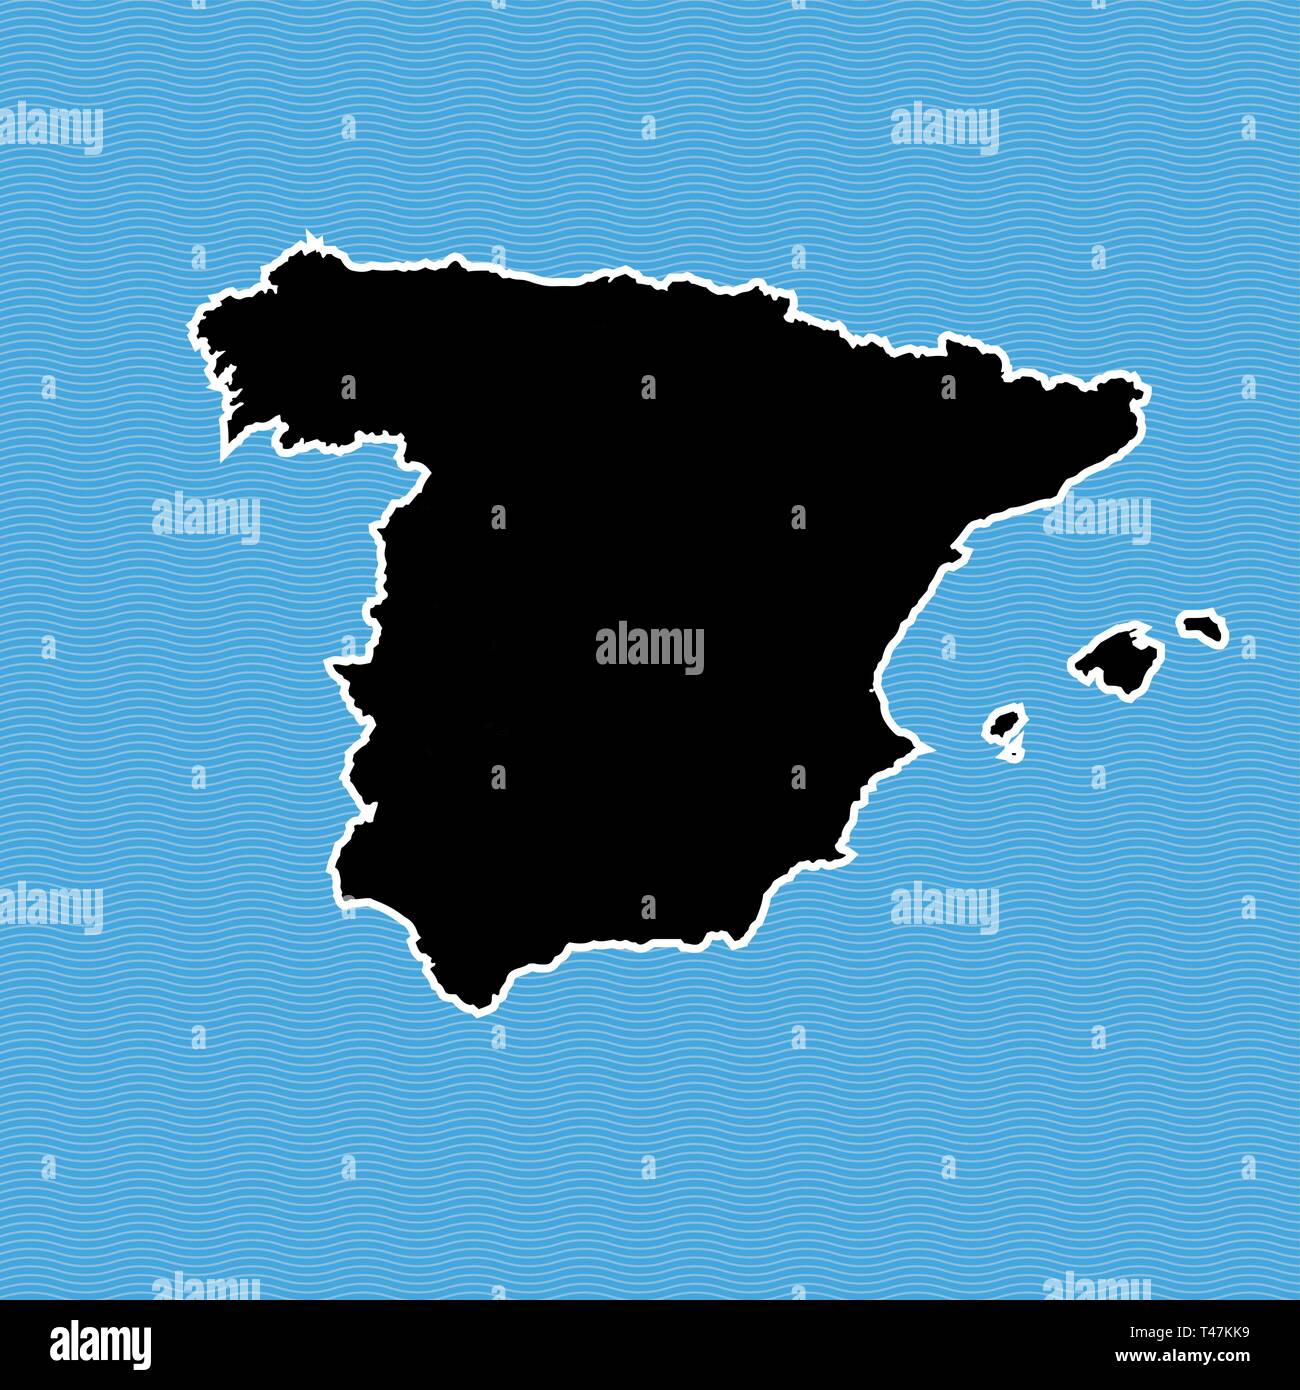 Spain map as island. Map separated on blue wave water background. Stock Vector